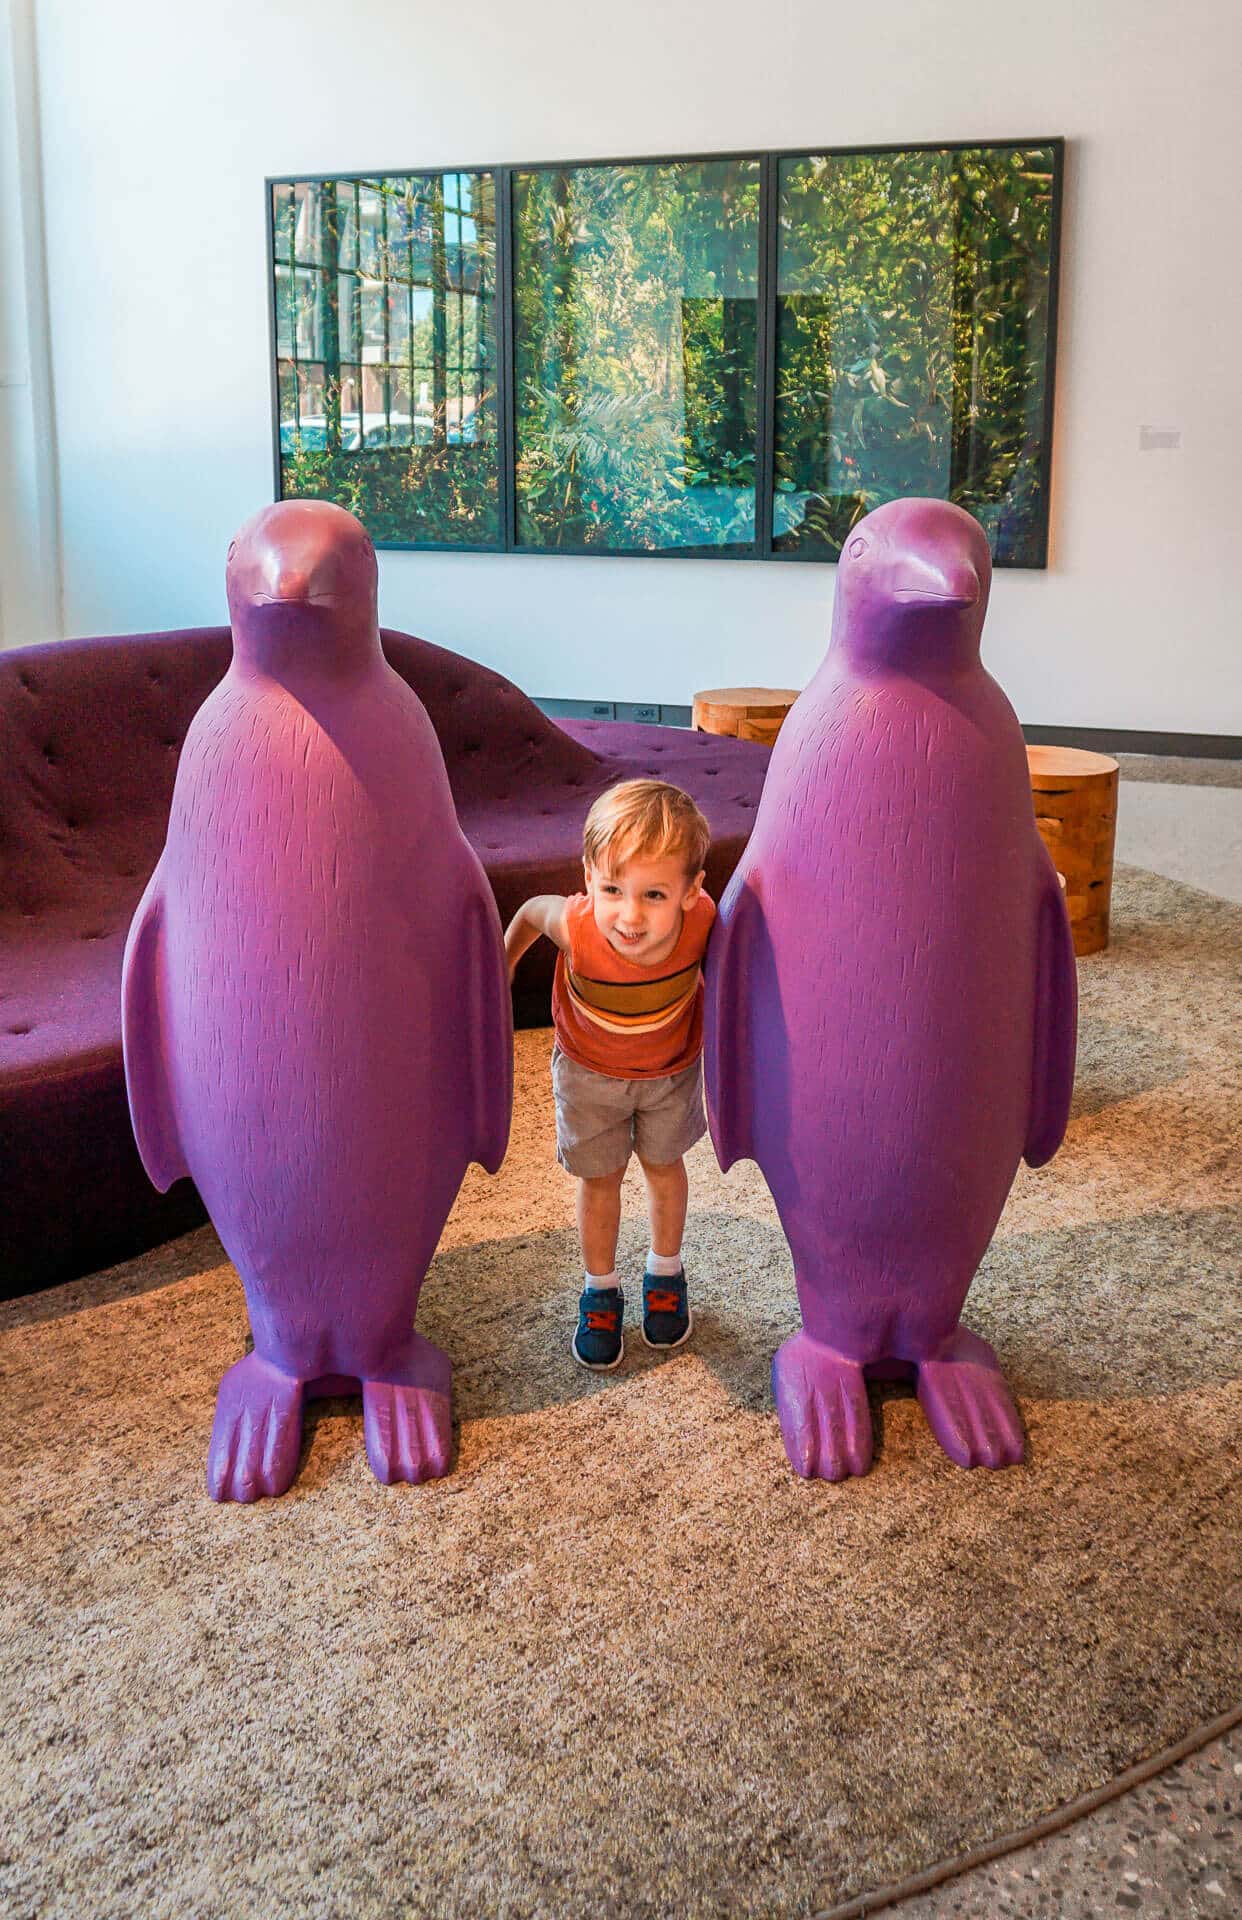 A toddler boy between two purple penguin statues at 21c Museum Hotel in Oklahoma City.